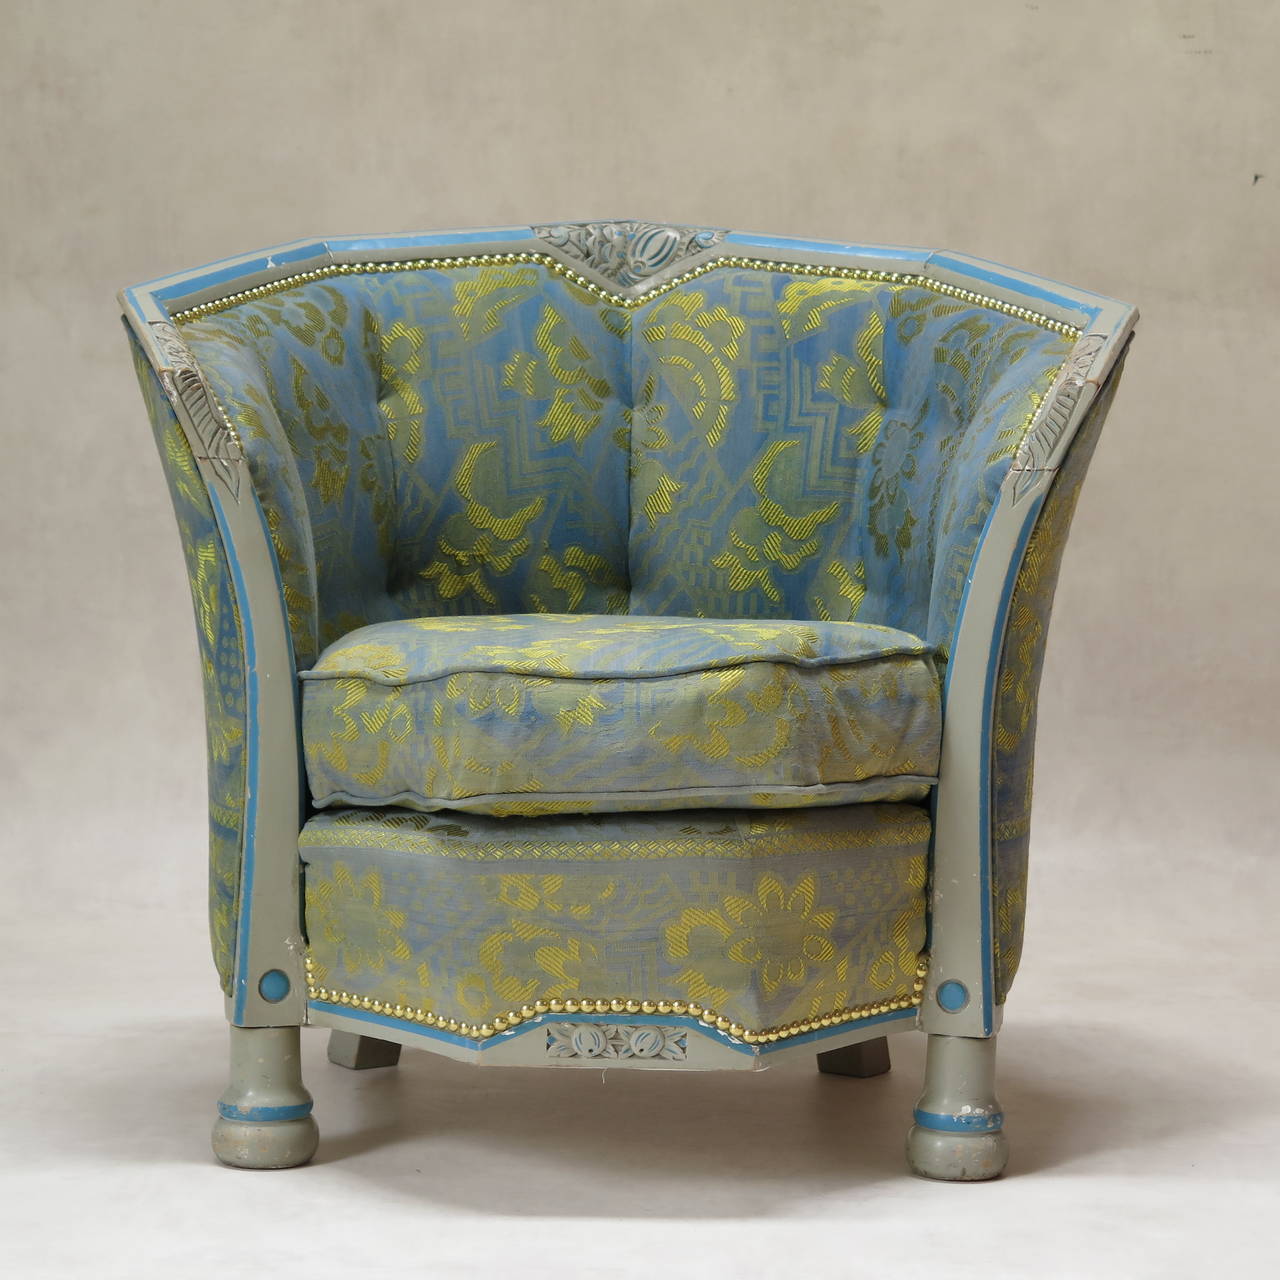 Charming and unusual Art Deco bergere, based on a nine-sided design, the back and sides opening upwards and outwards like a corolla. The wood frame is carved with stylized floral motifs and painted light grey with details picked out in blue.